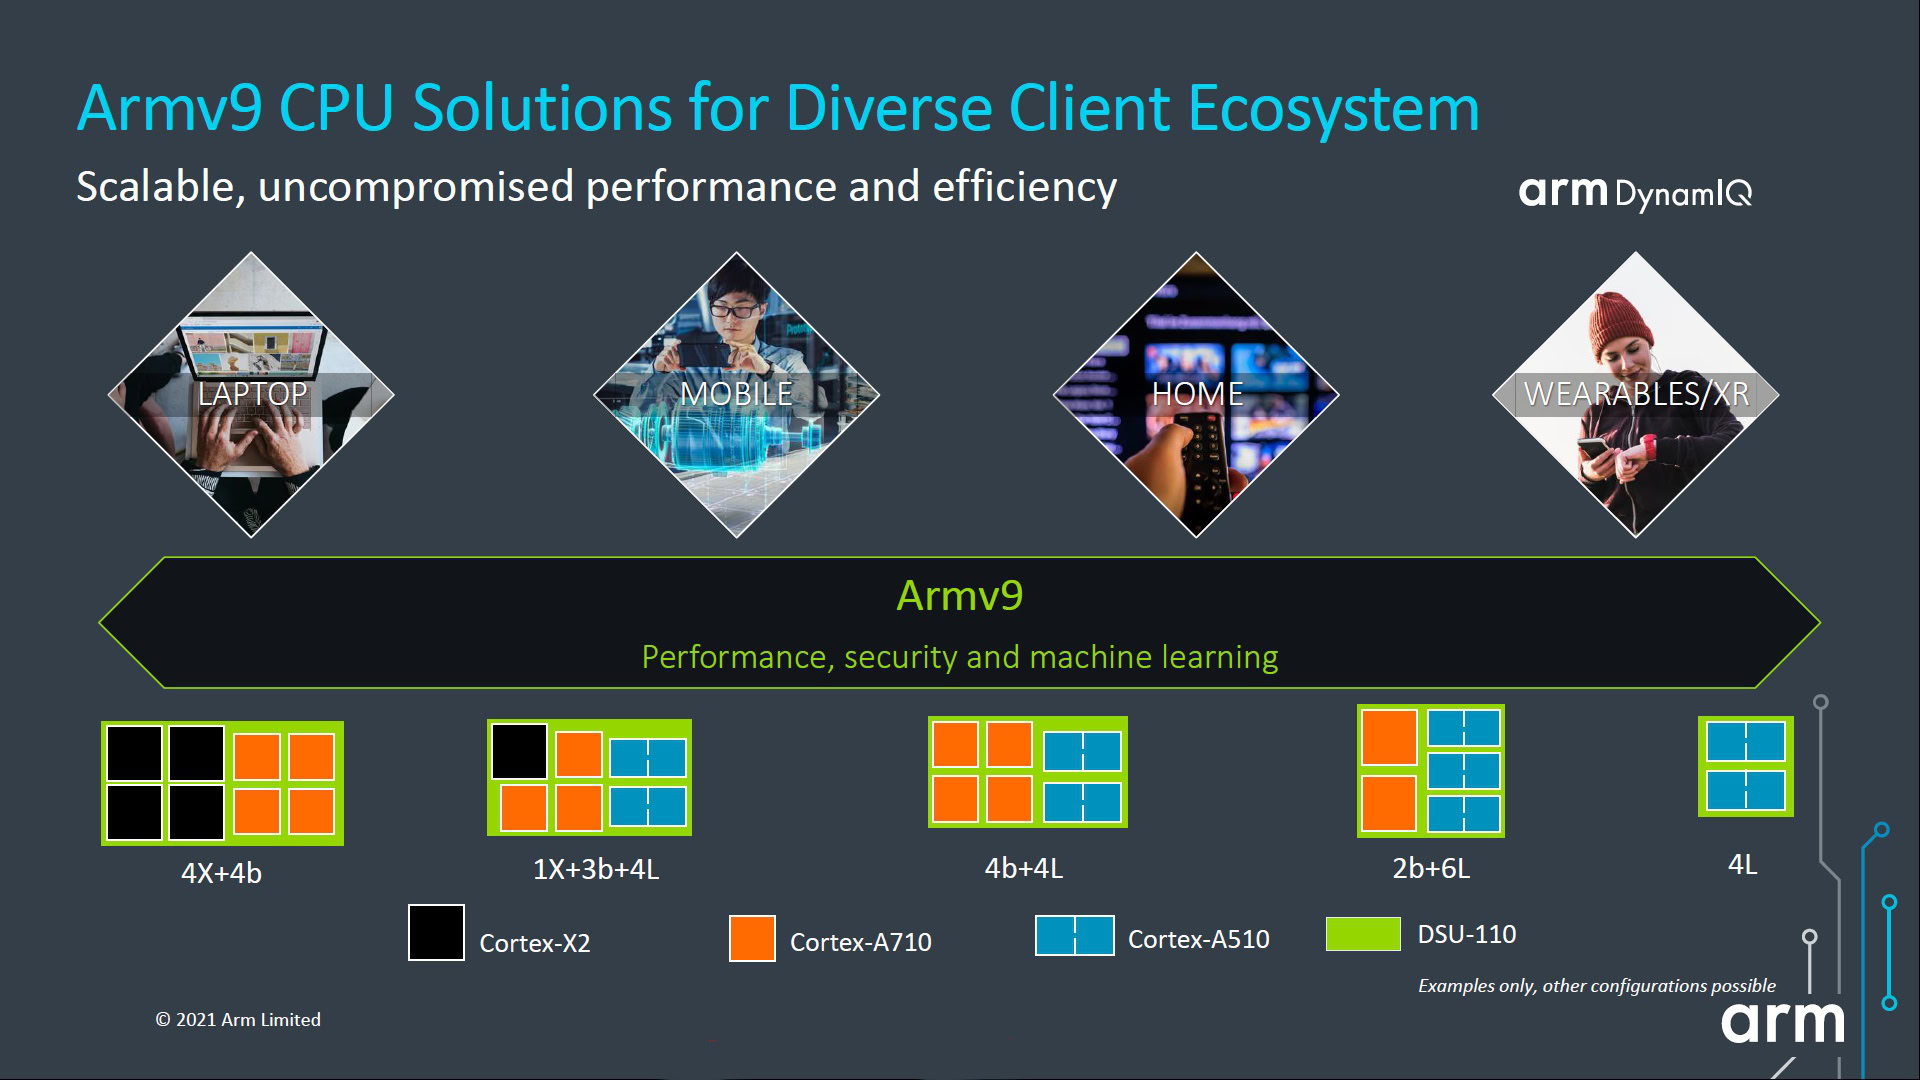 Armv9 CPU solutions for a diverse client ecosystem